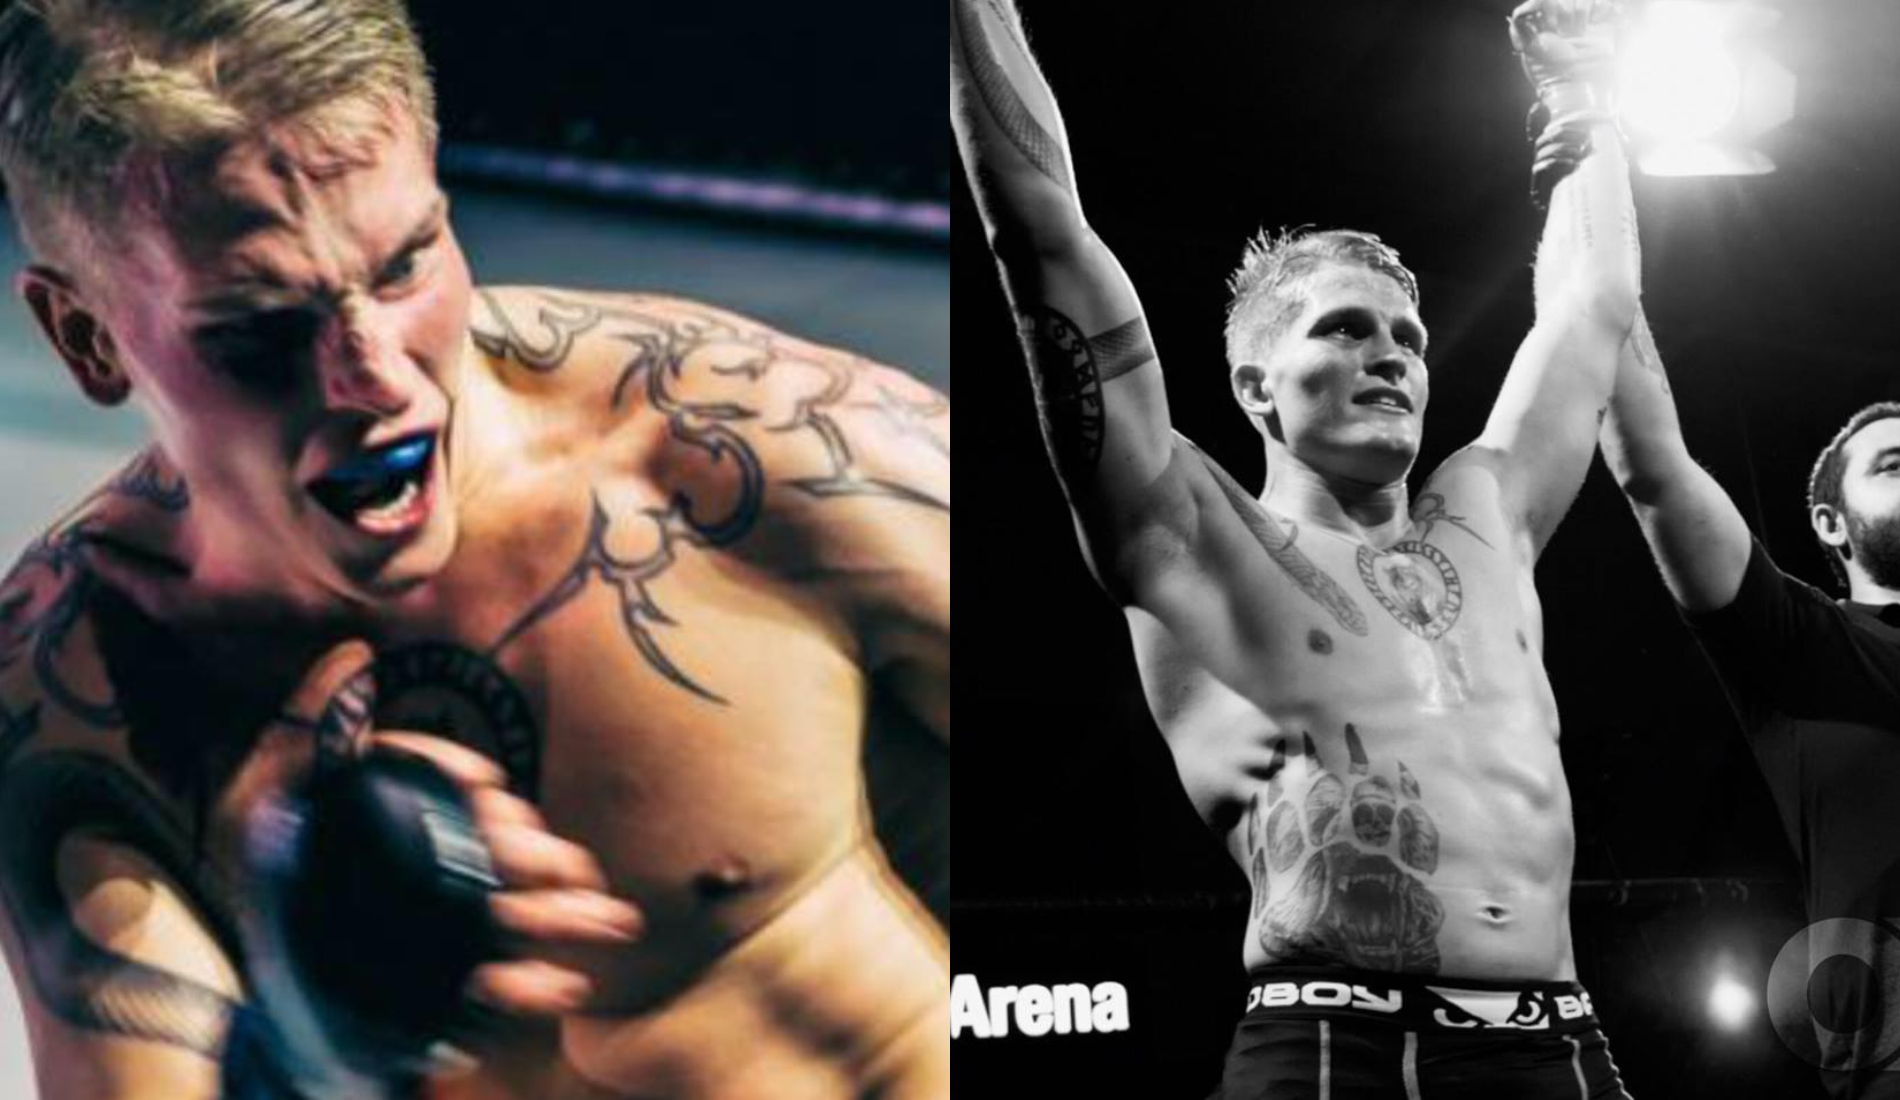 Sweden's fierce new welterweight sounds off: 'I will become European champion, nothing less'